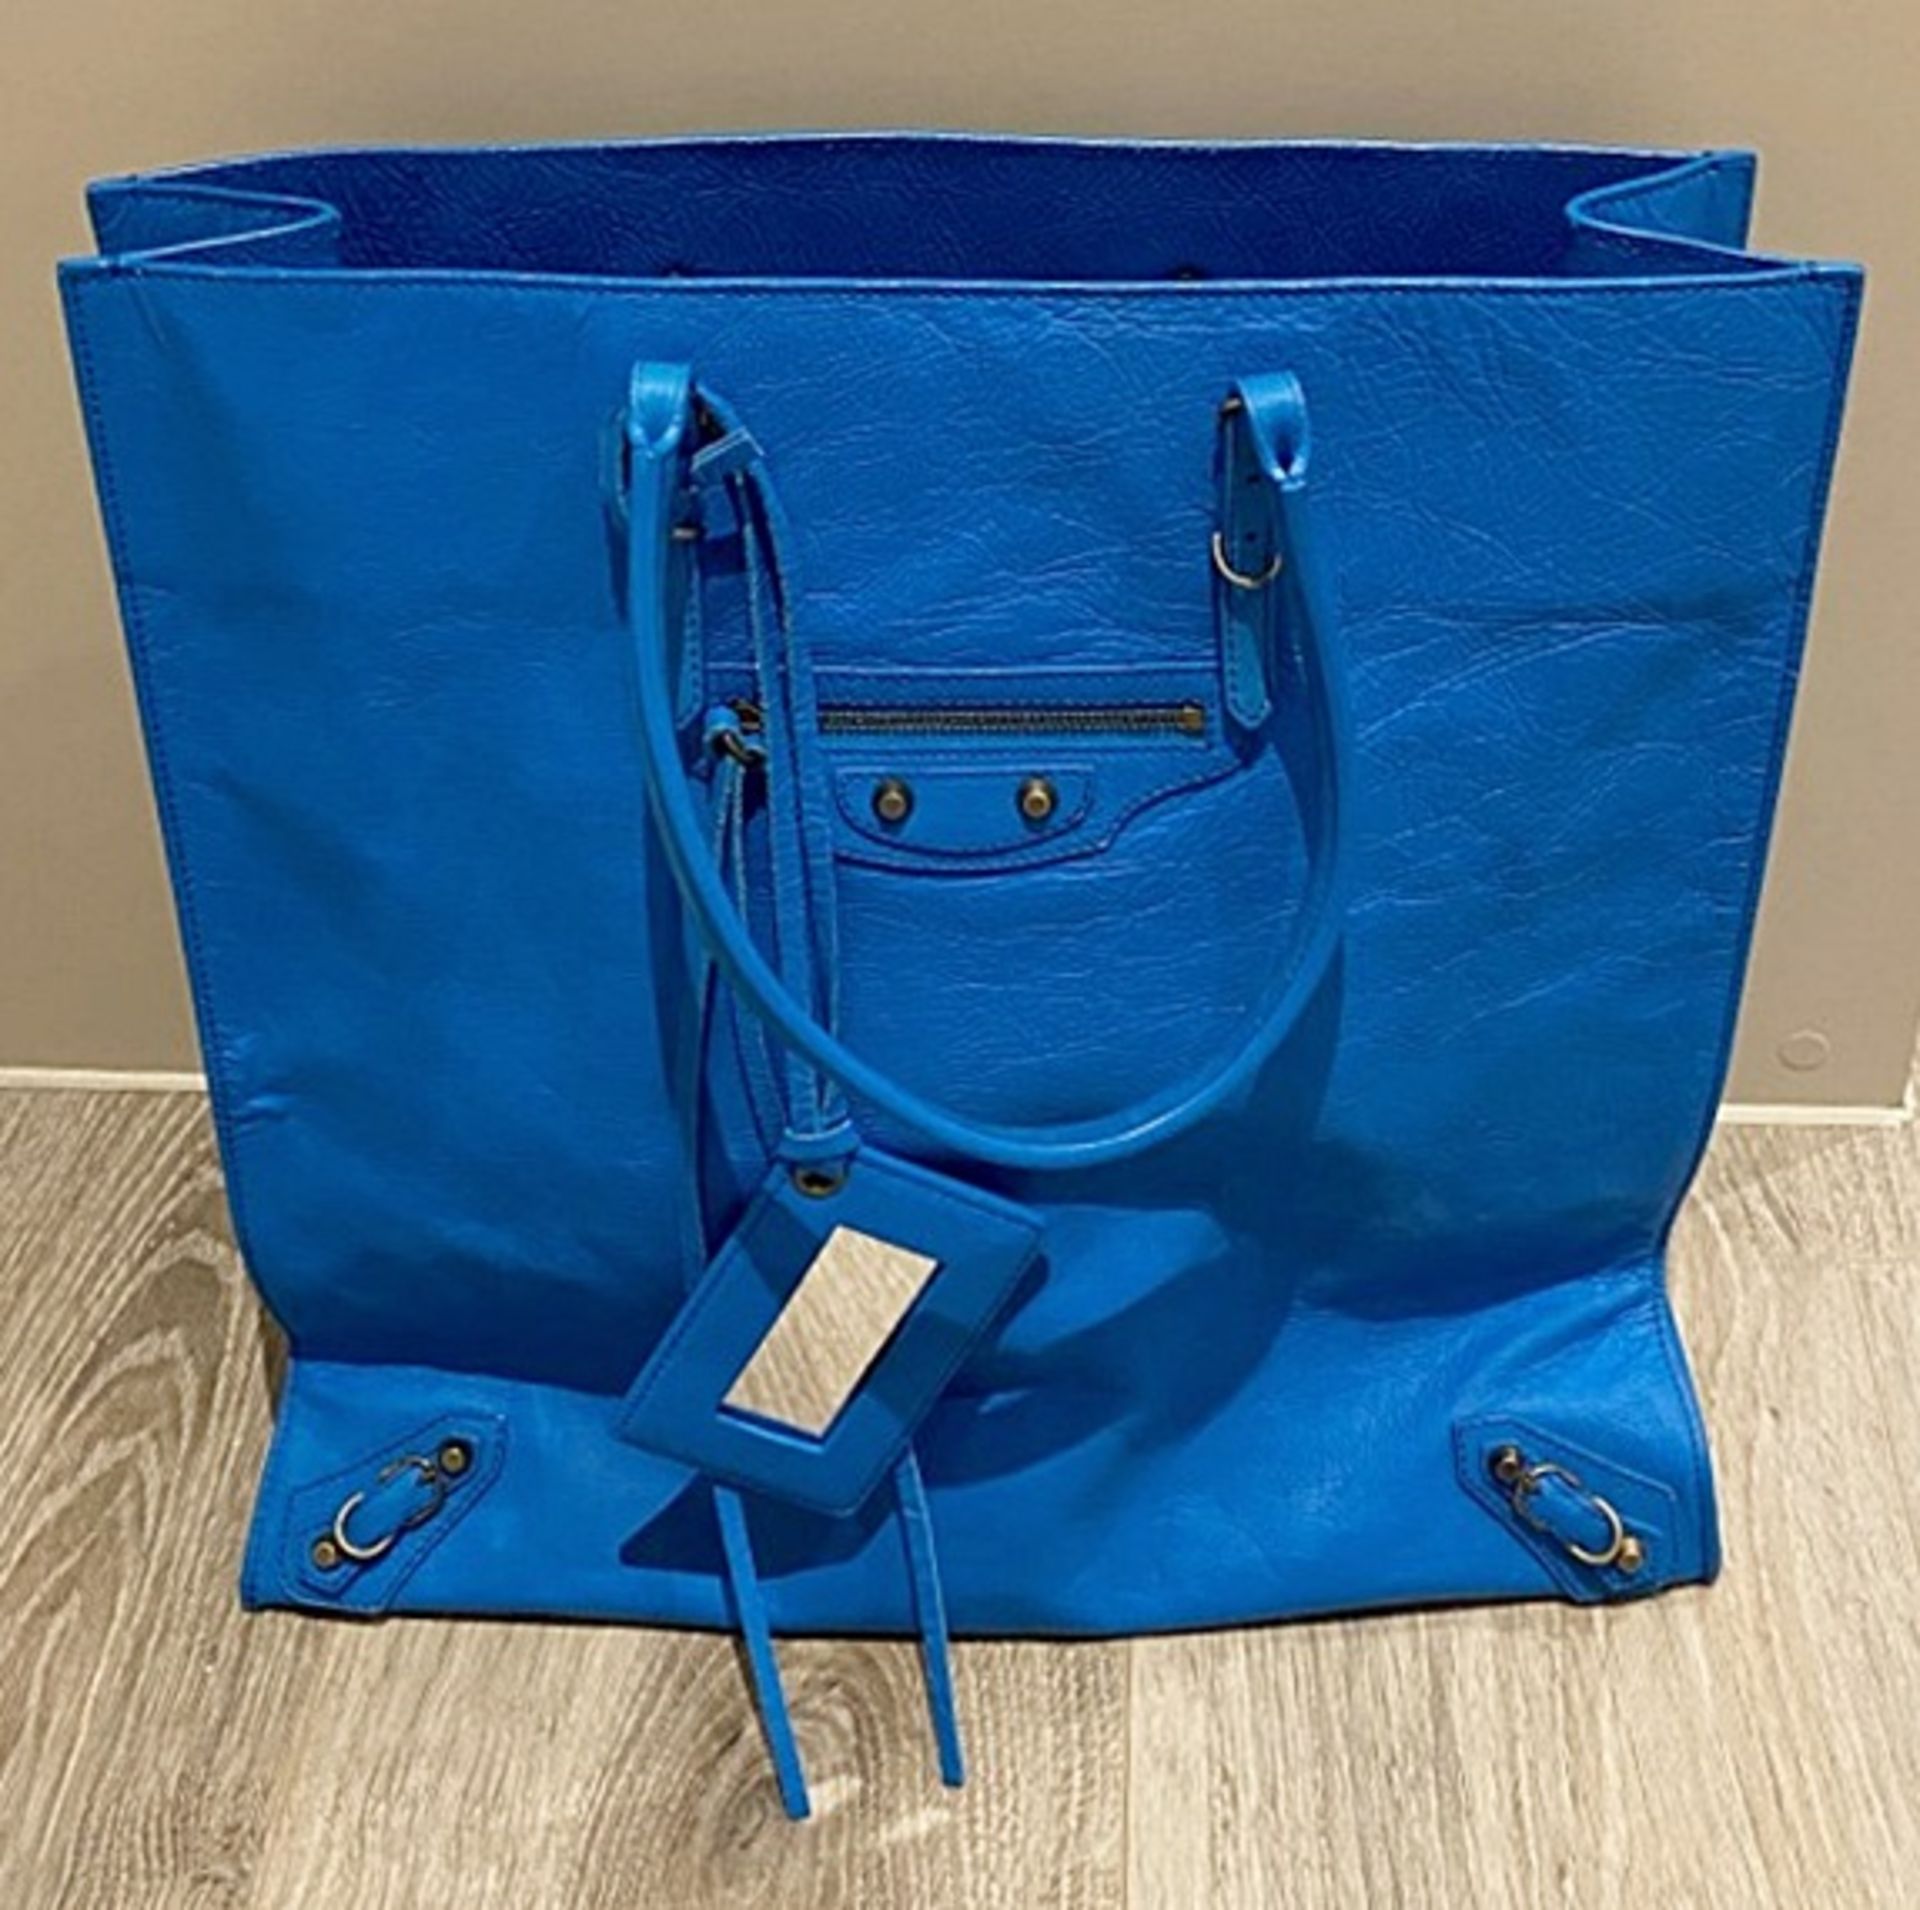 1 x Balenciaga Bag In Blue - Preowned In Like New Condition - Ref: LOT55 - CL594 - - Image 2 of 4